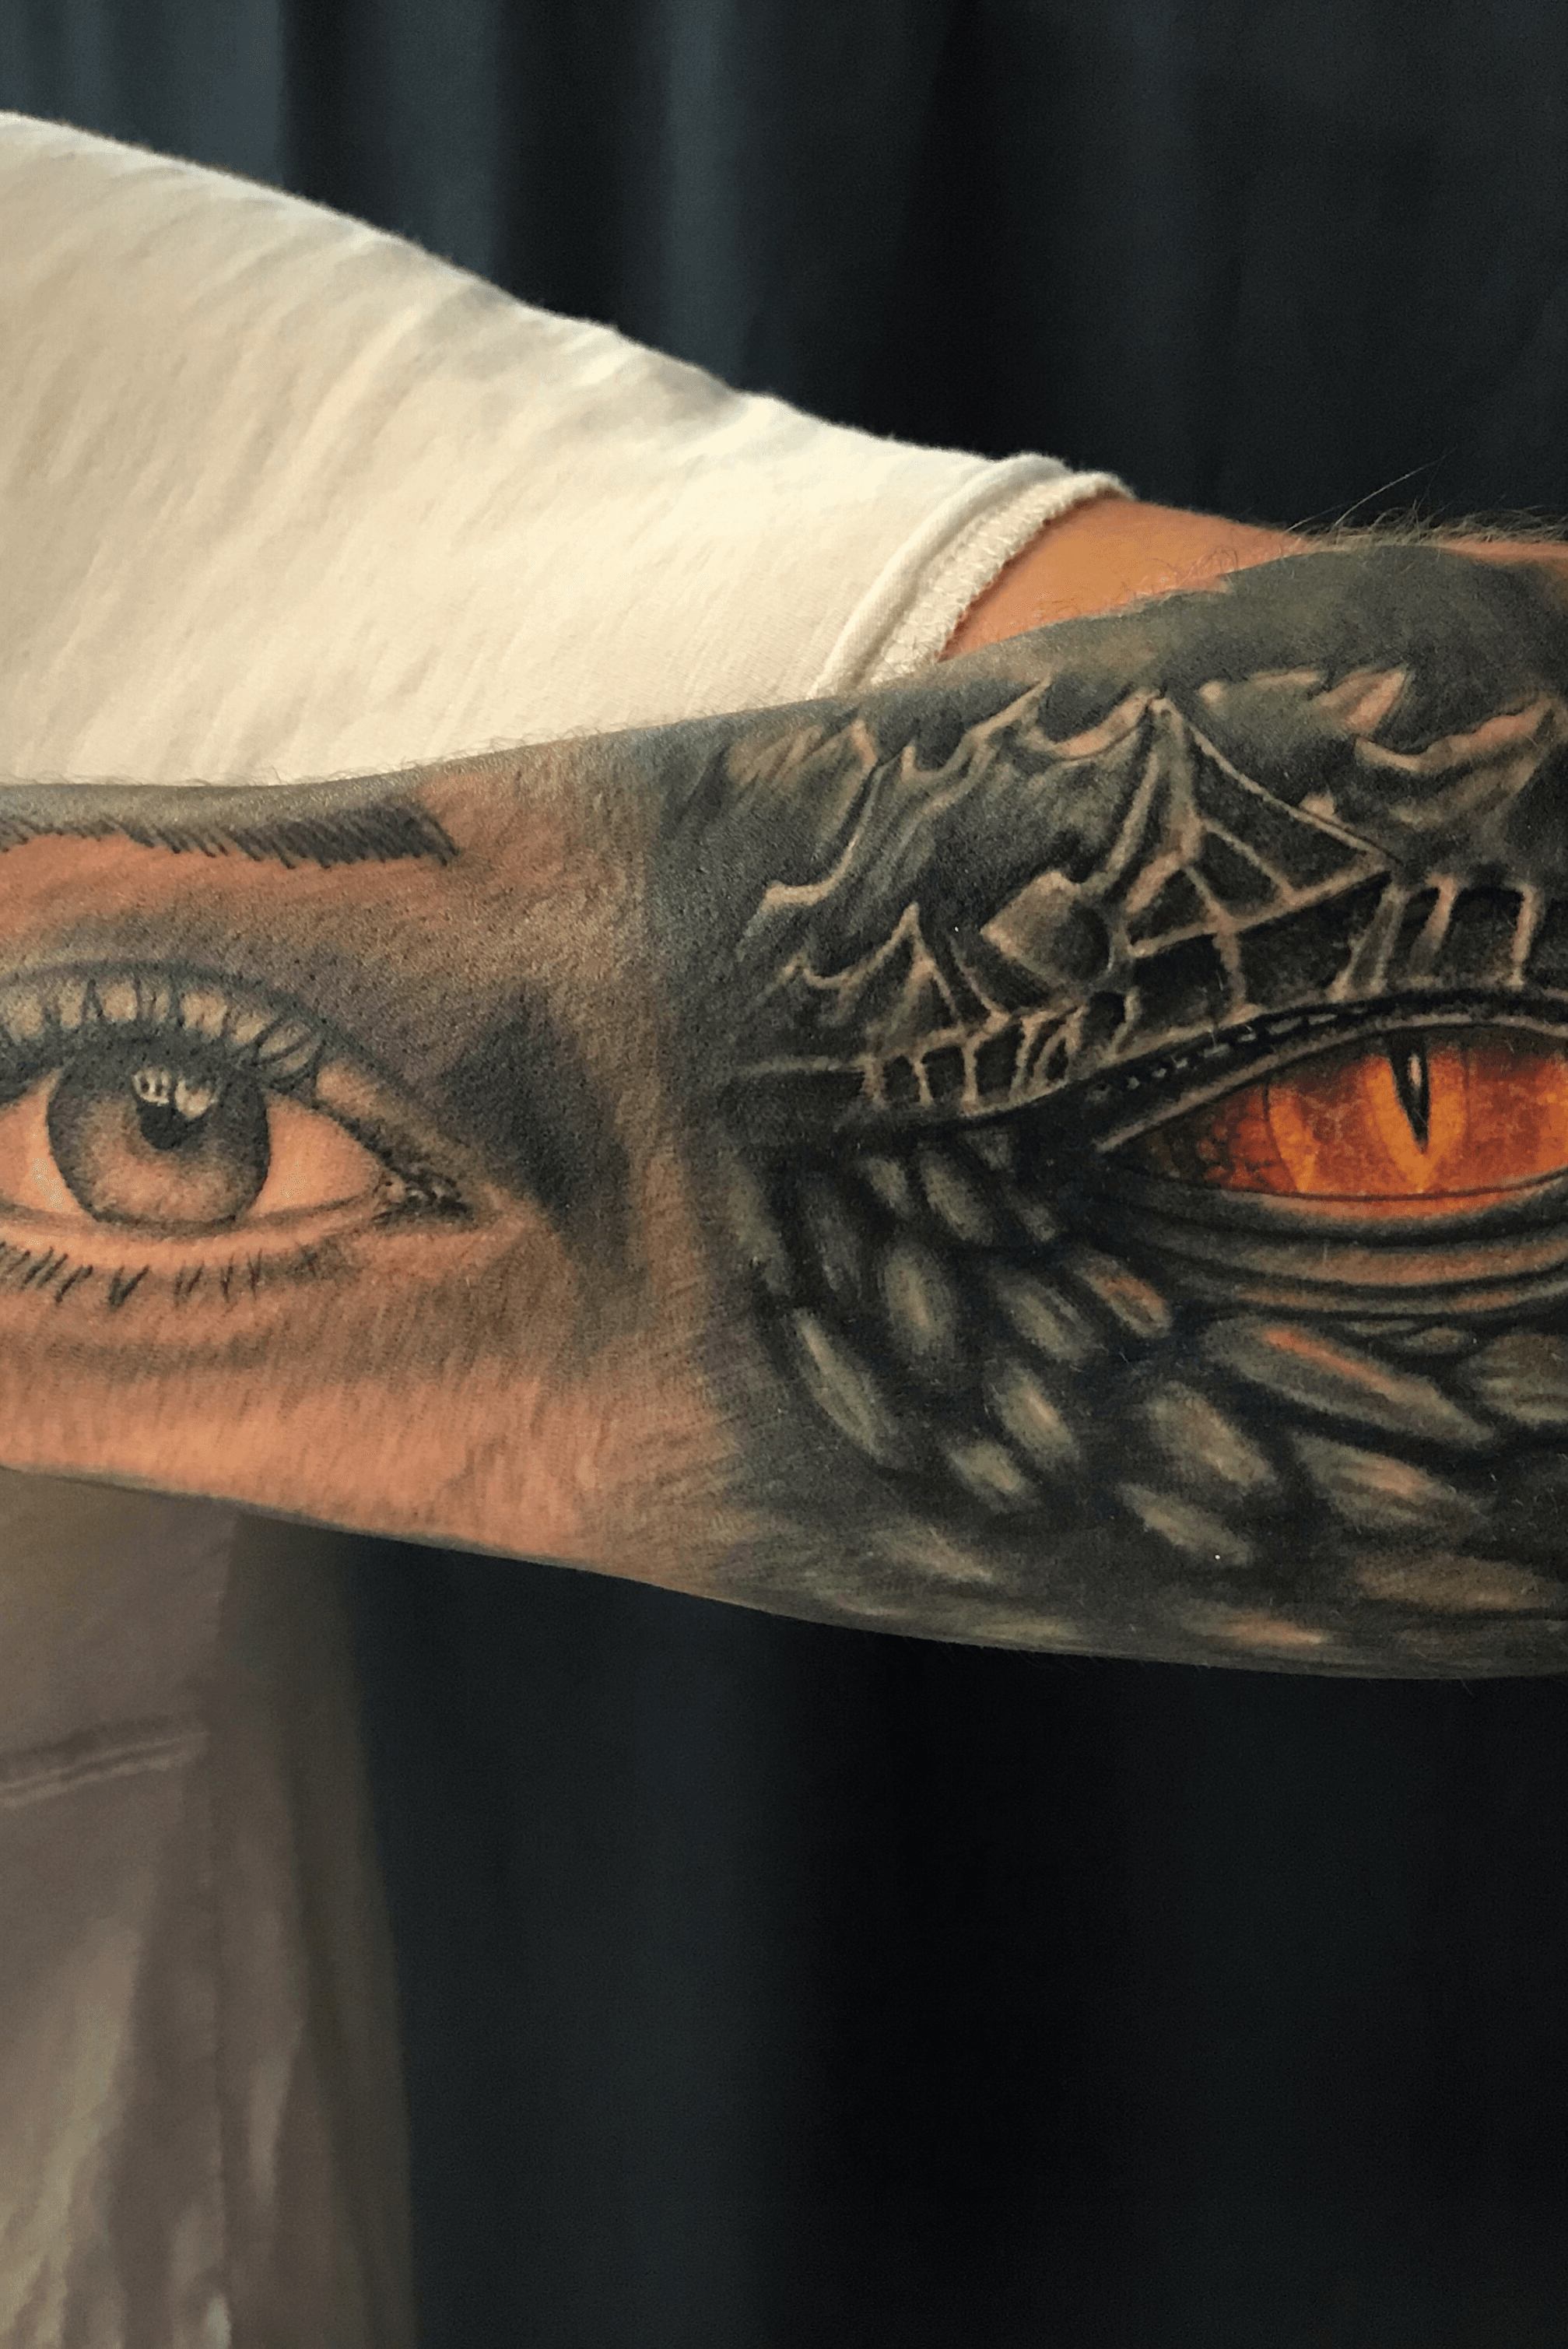 Witches Britches  Broomsticks  Wow amazing dragon eye tattoo We would  love to see your dragon tattoos Feel free to upload a photo below Photo  Credit Dragon Eye Tattoo Artist marcstudioink 